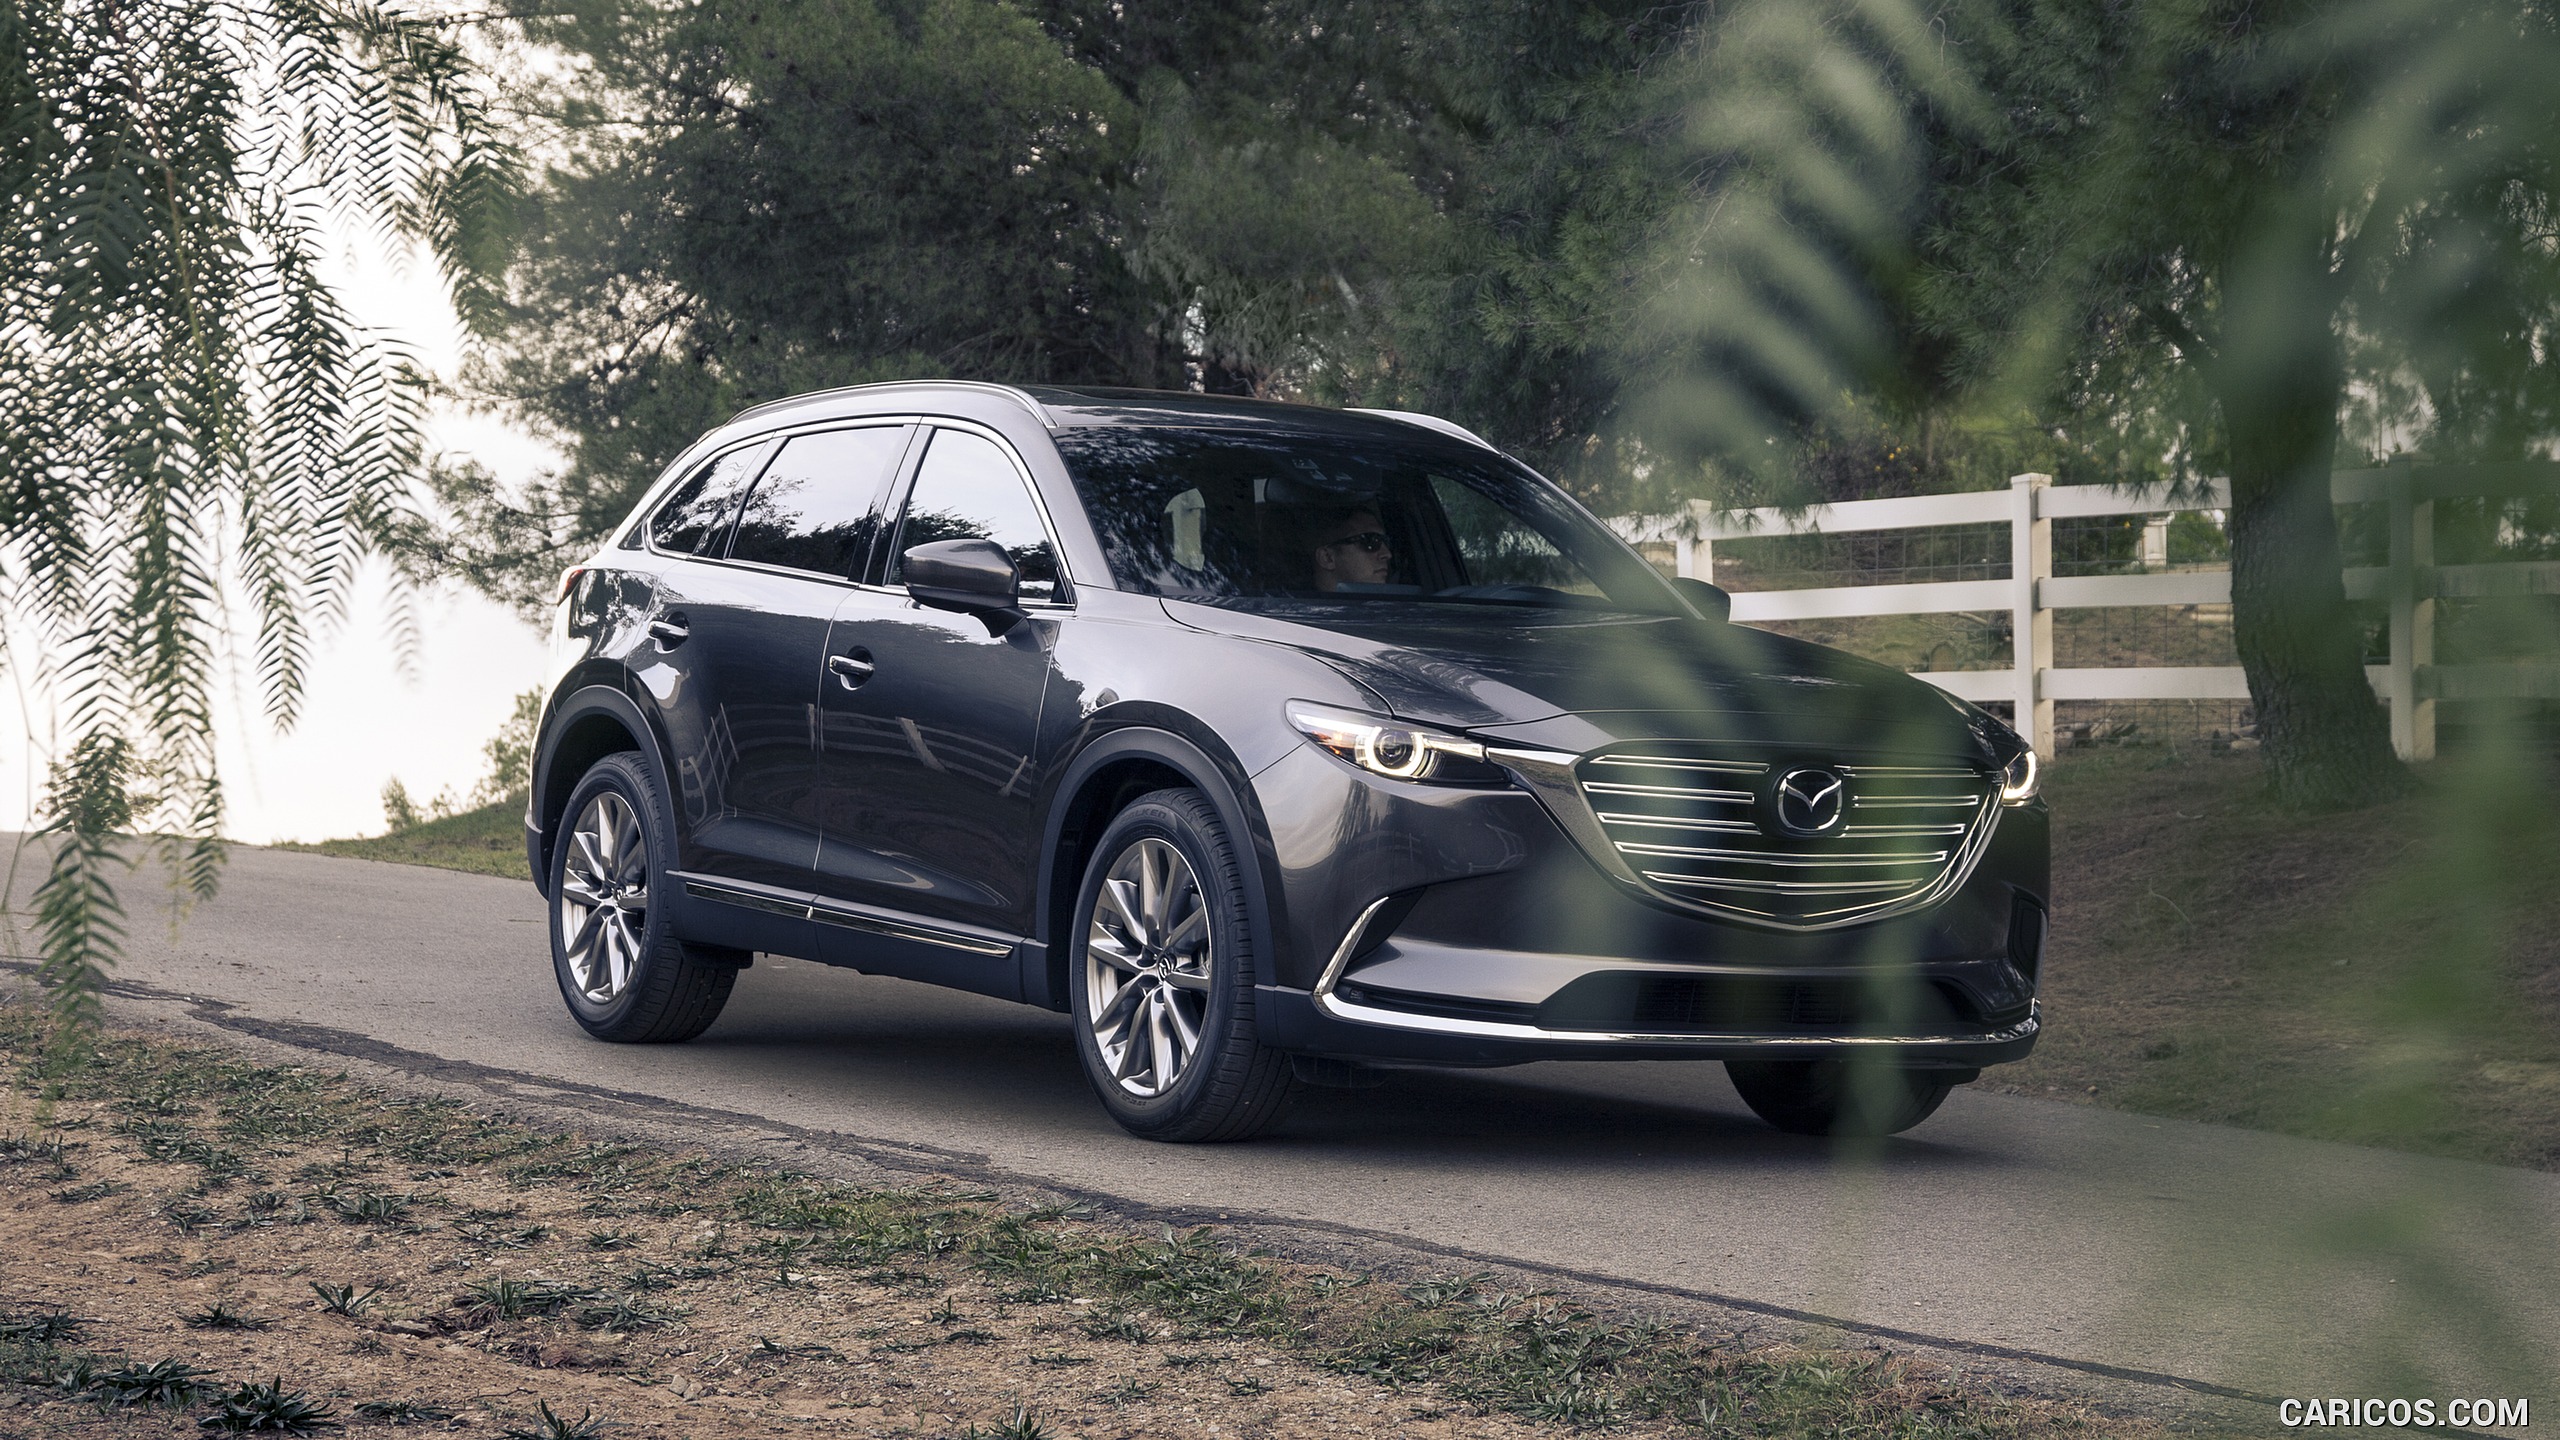 2016 Mazda CX-9 - Front, #7 of 69